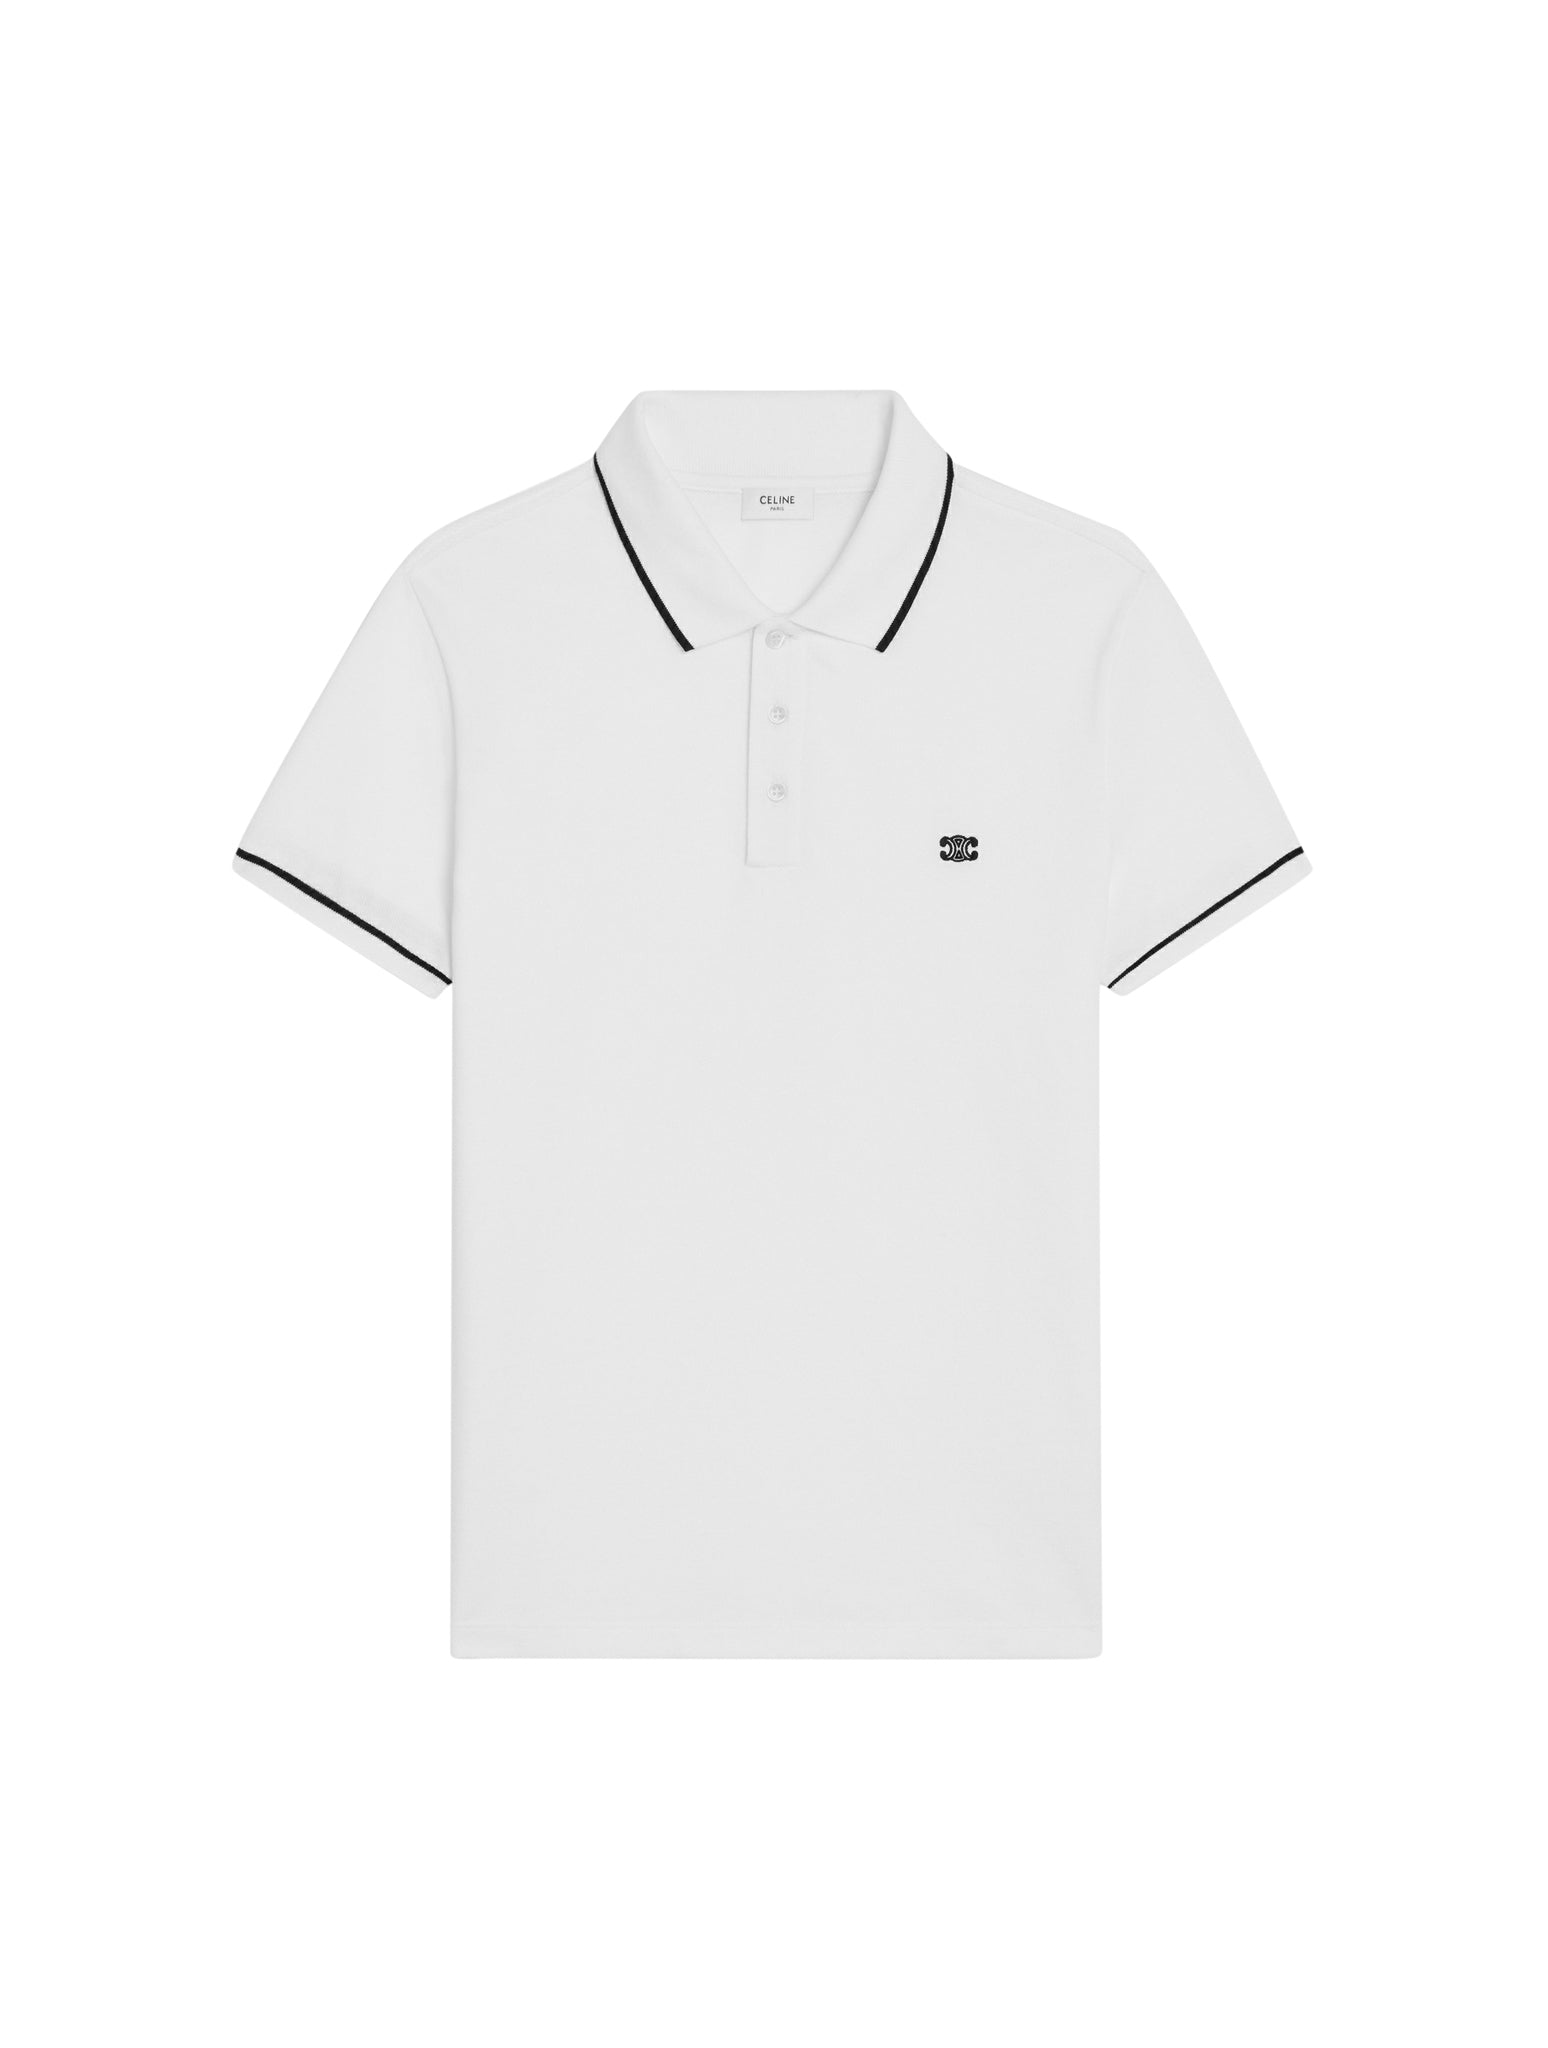 CLASSIC POLO SHIRT IN OFF-WHITE / BLACK COTTON PIQUE